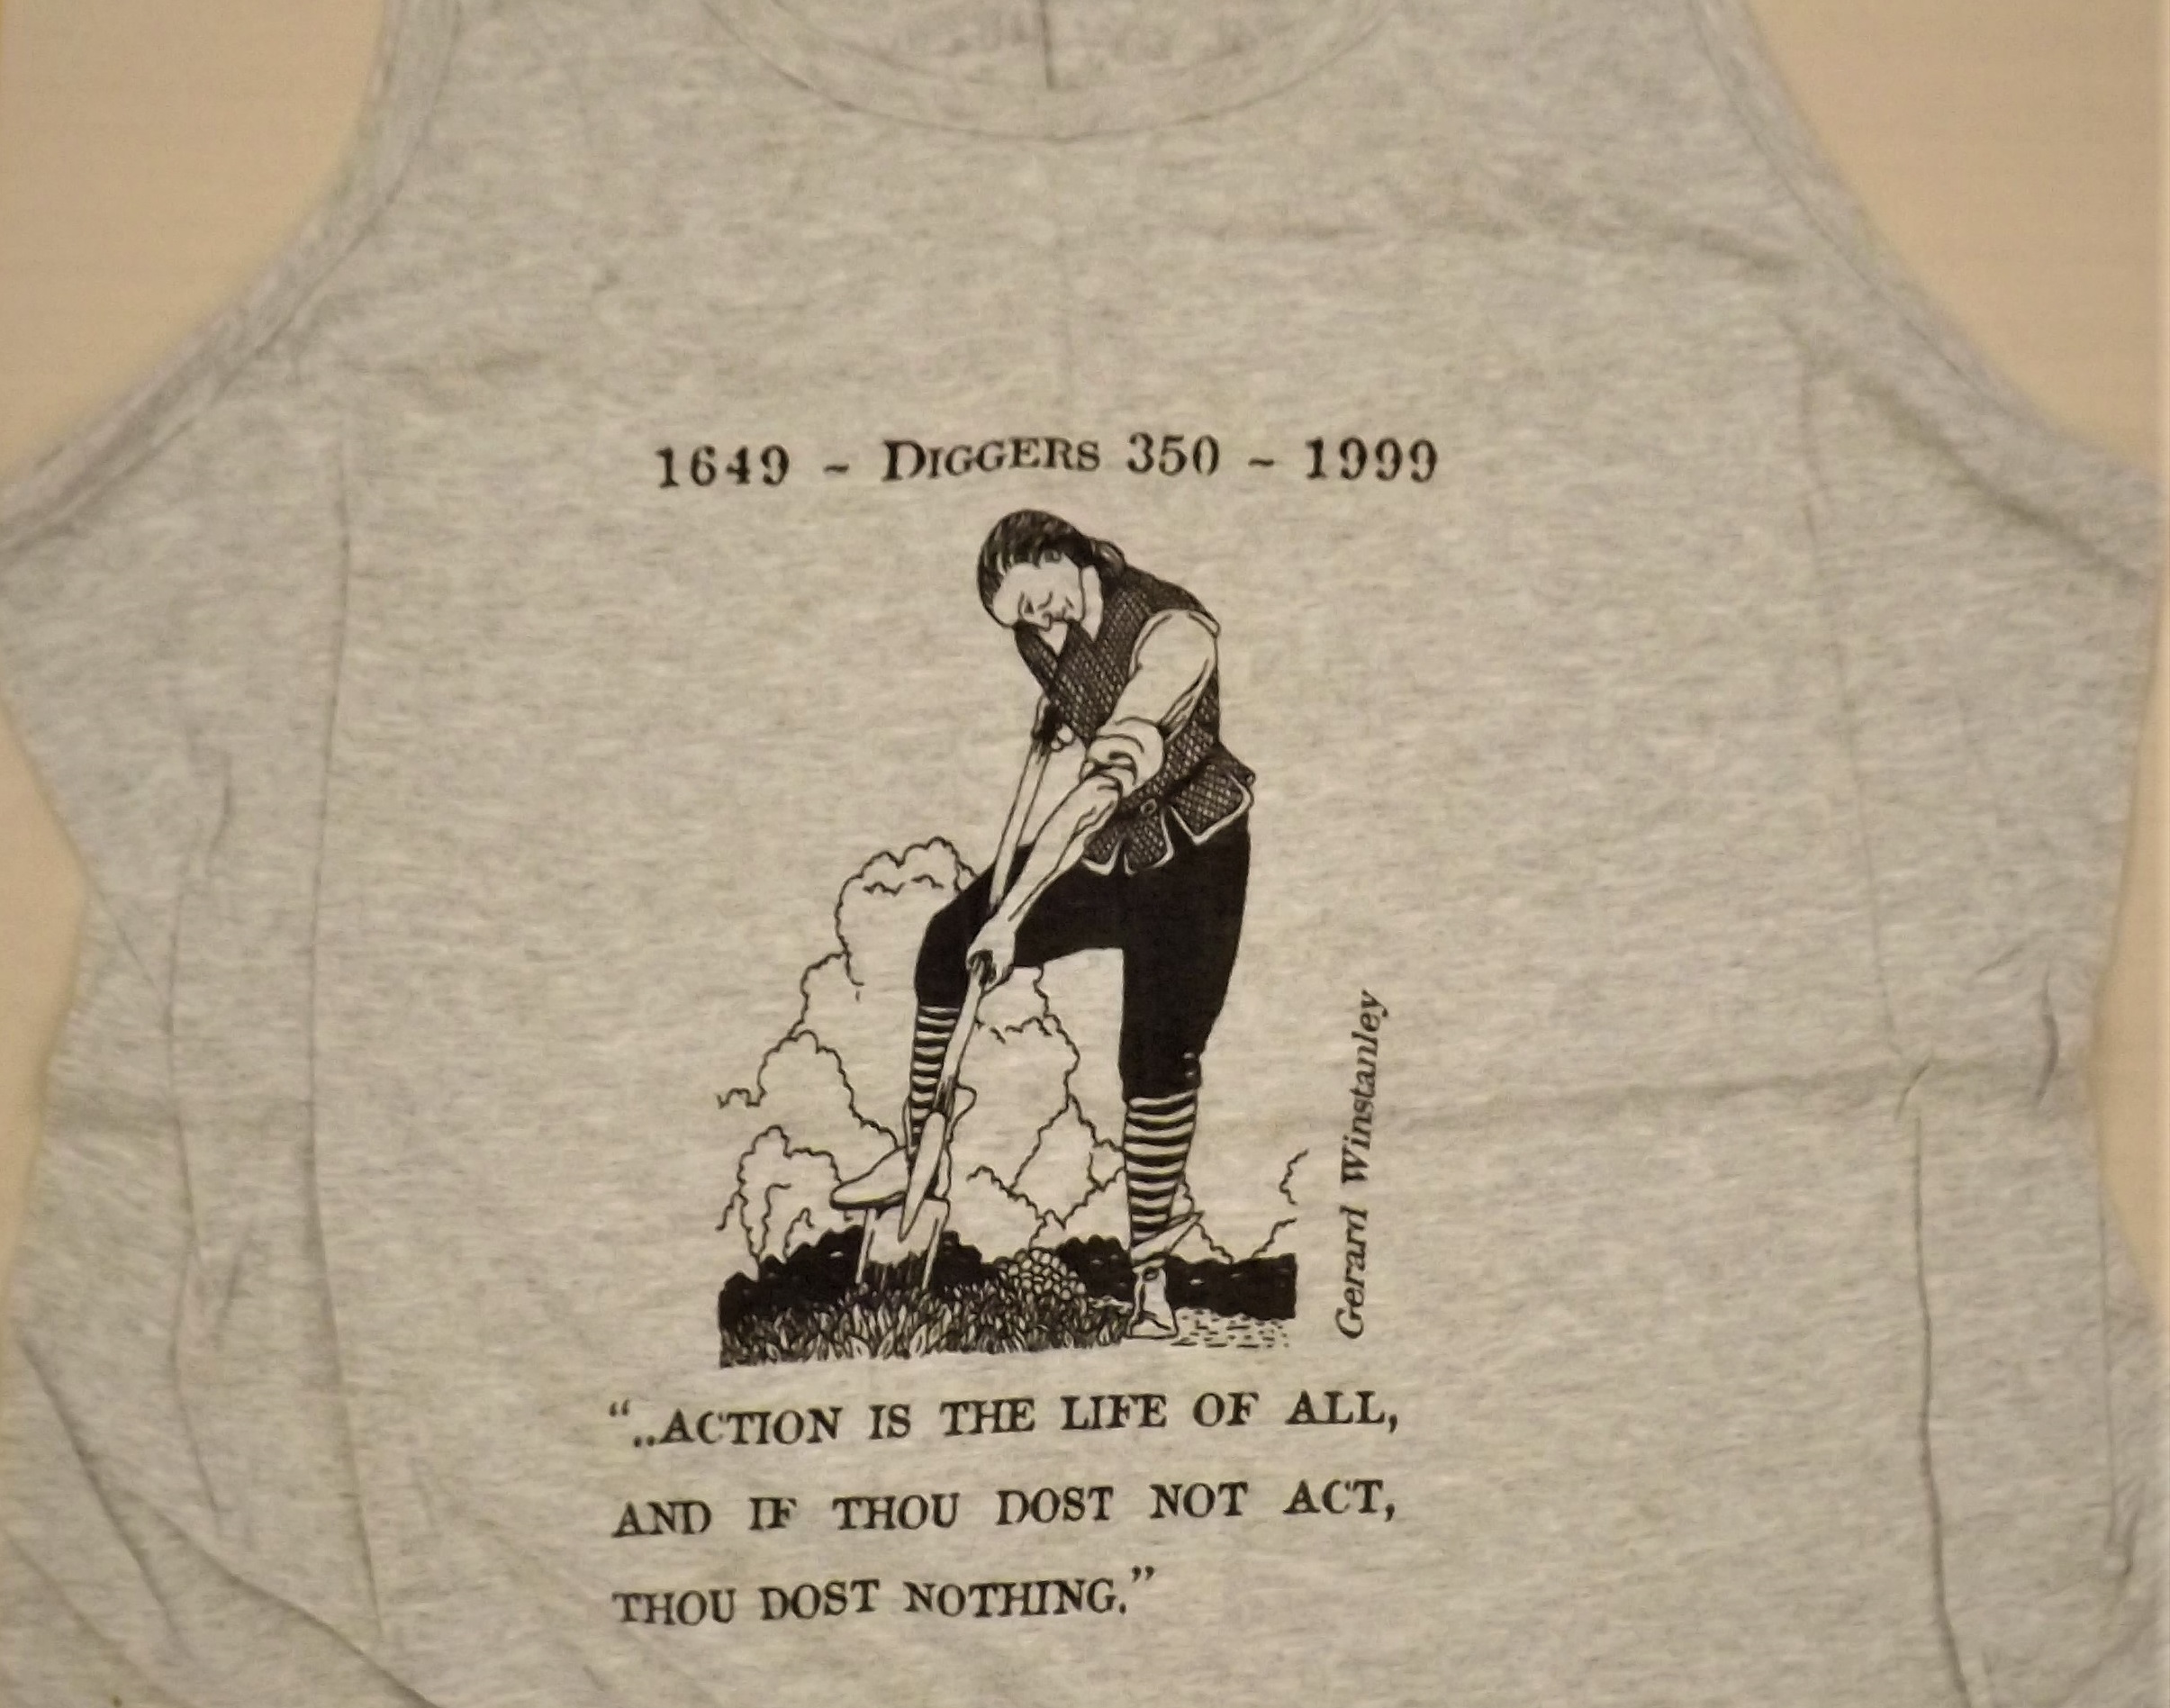 The front of a vest from The Land is Ours Campaign with Gerrard Winstanley quote 'Action is the life of all, and if thou dost not act, thou dost nothing'.